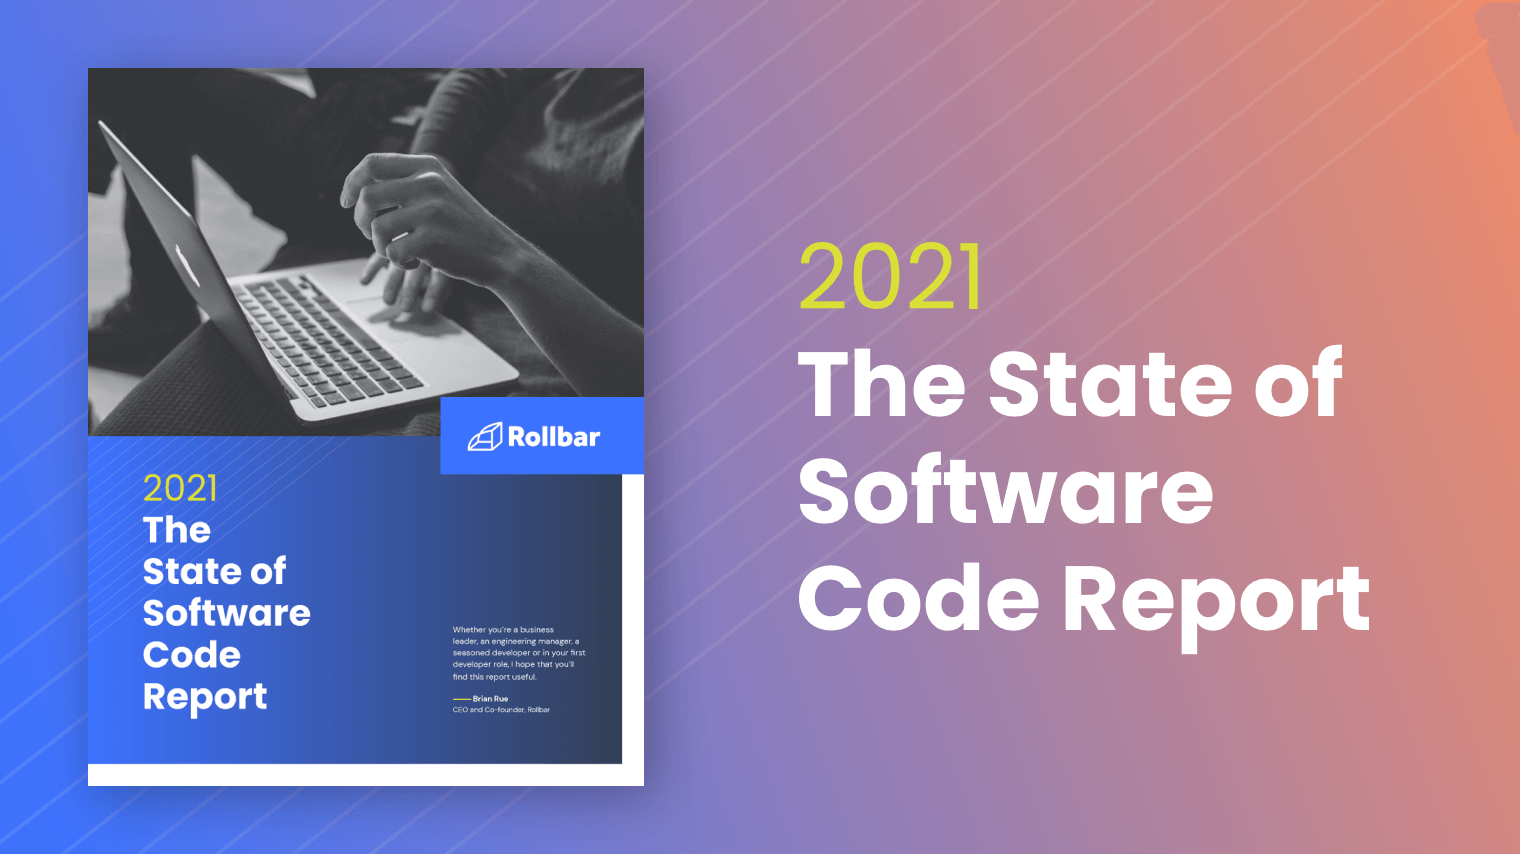 Announcing The 2021 State of Software Code Report